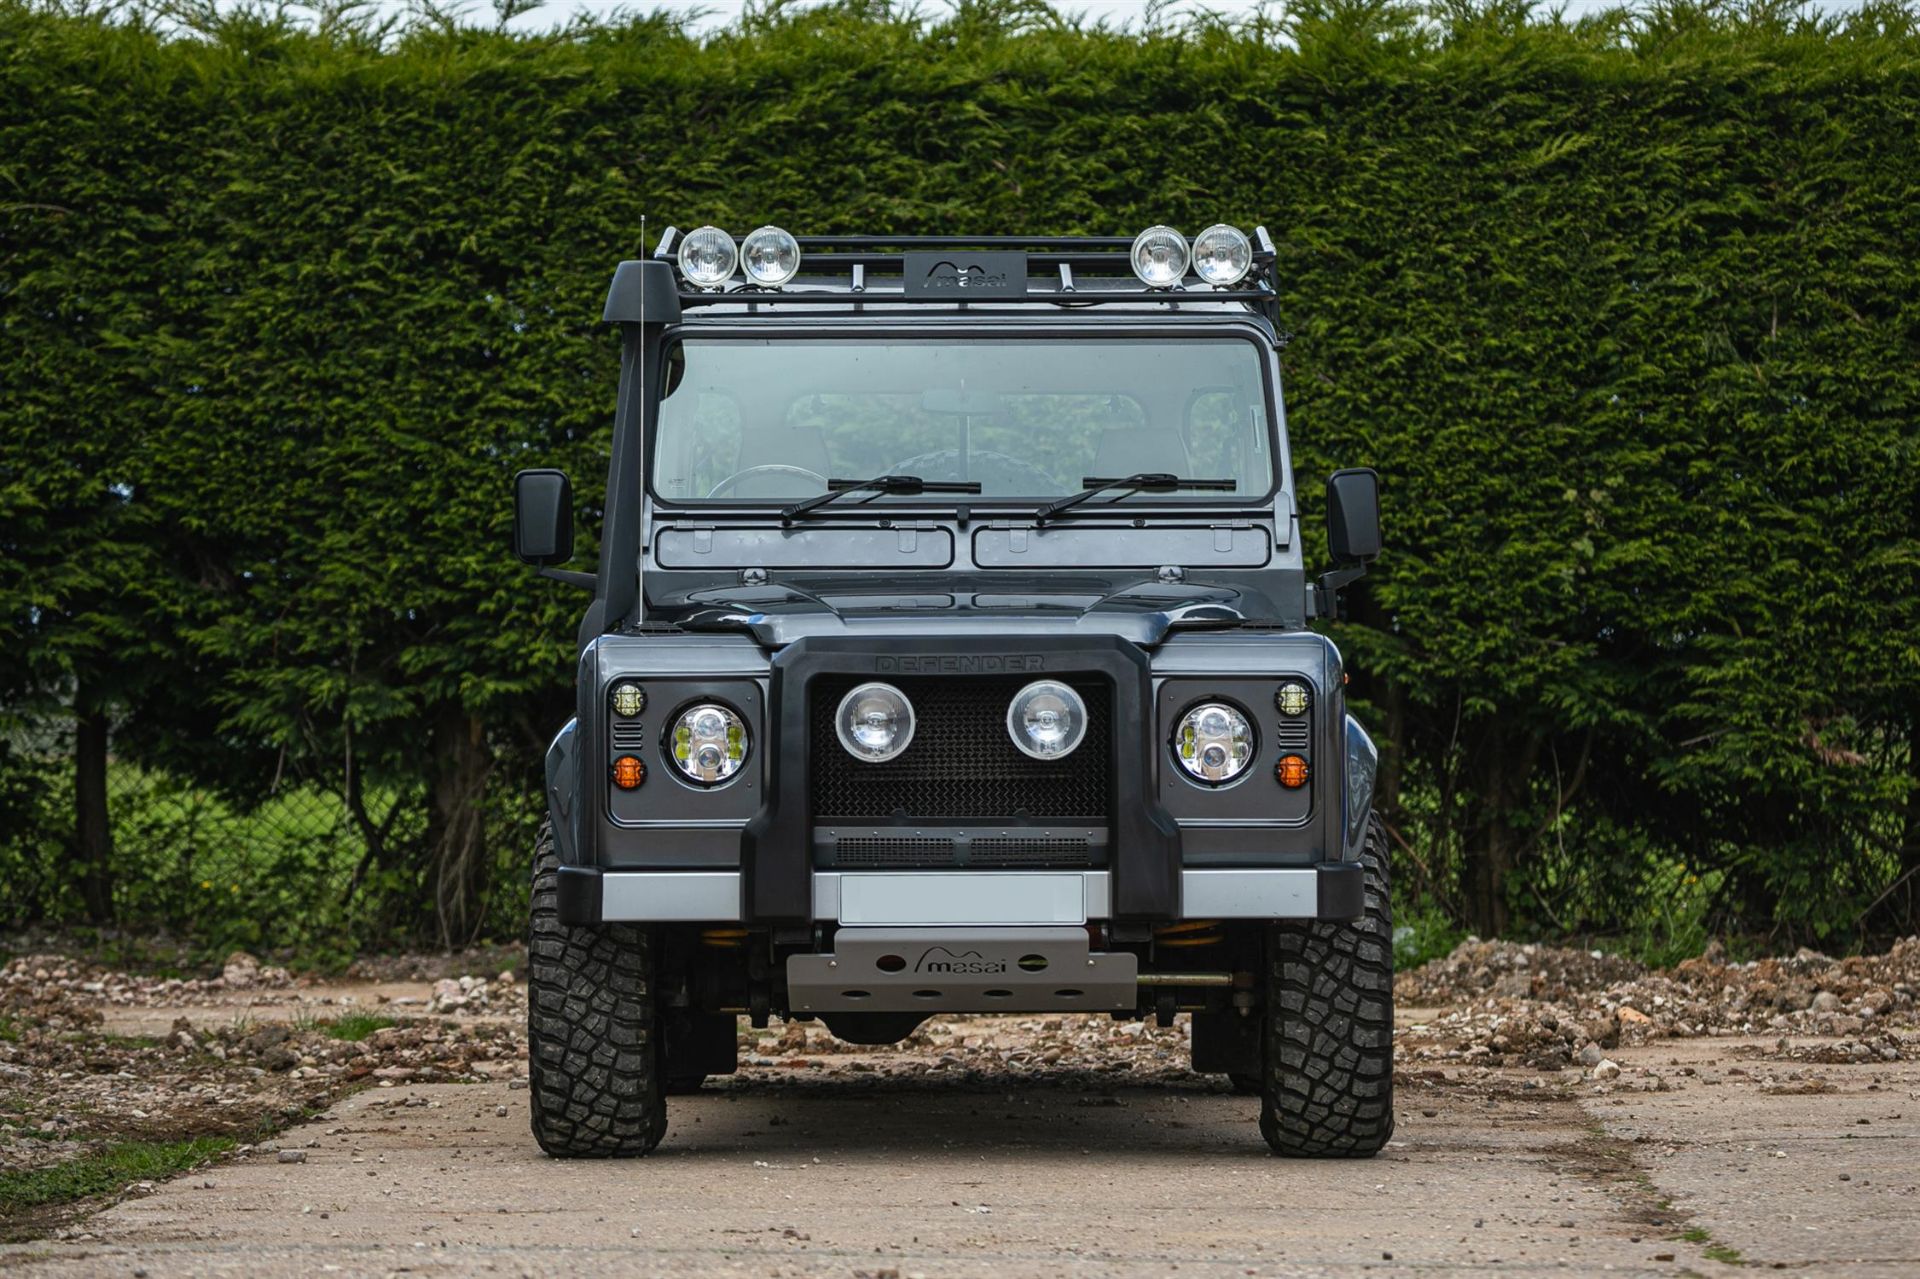 2002 Land Rover Defender 110 TD5 Double-Cab - Image 6 of 10